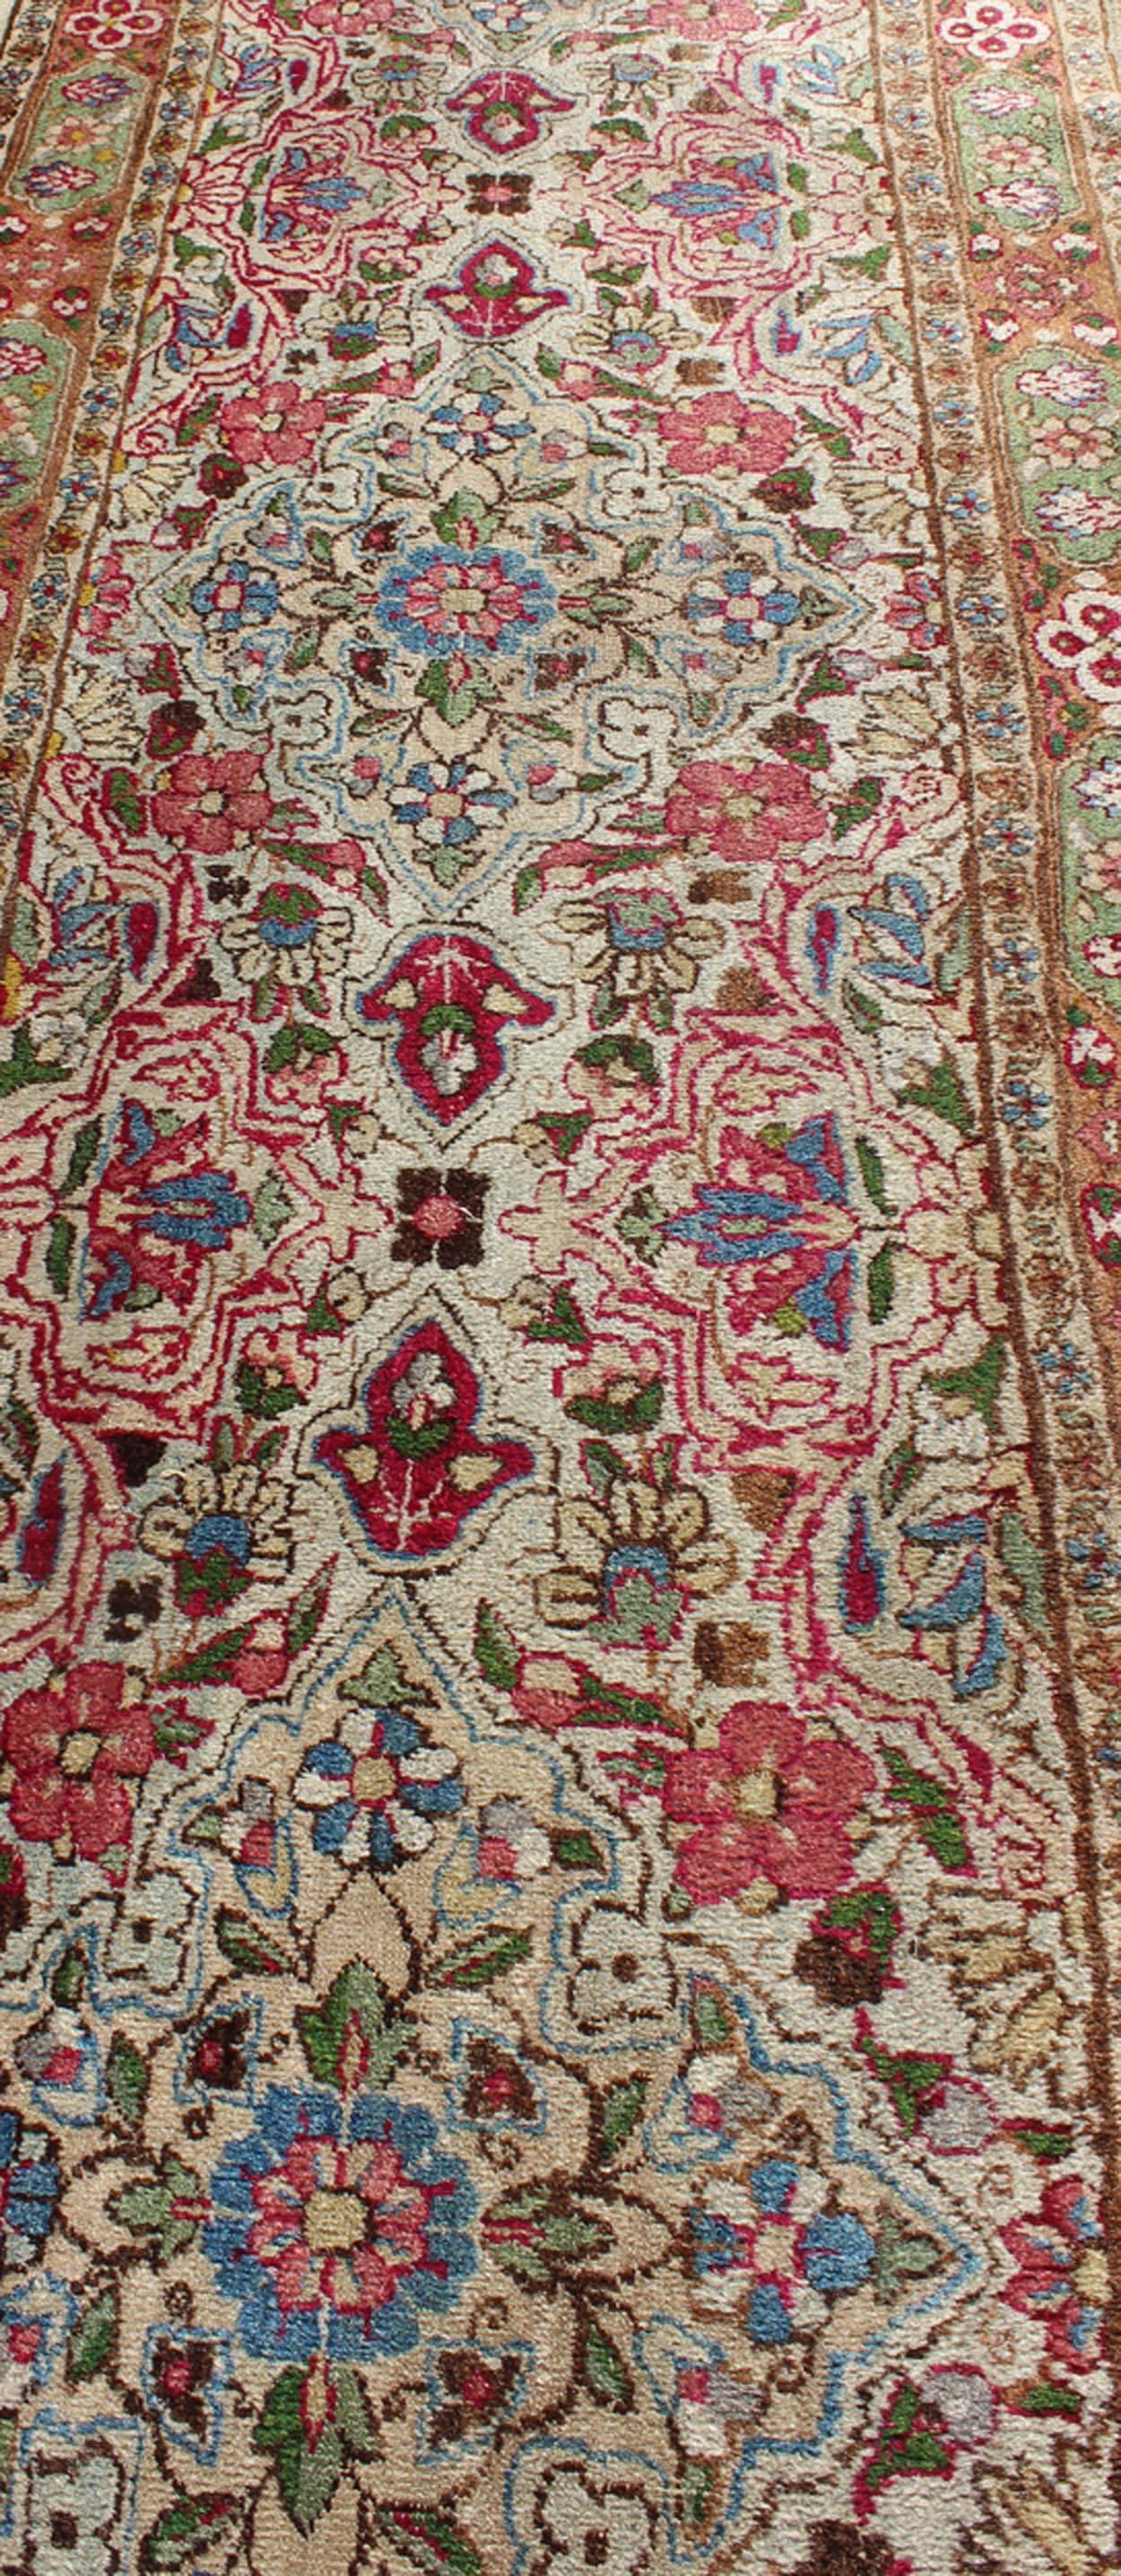 Early 20th Century Indian Amritsar Antique Runner in Ivory, Red, Pink, Blue, Green